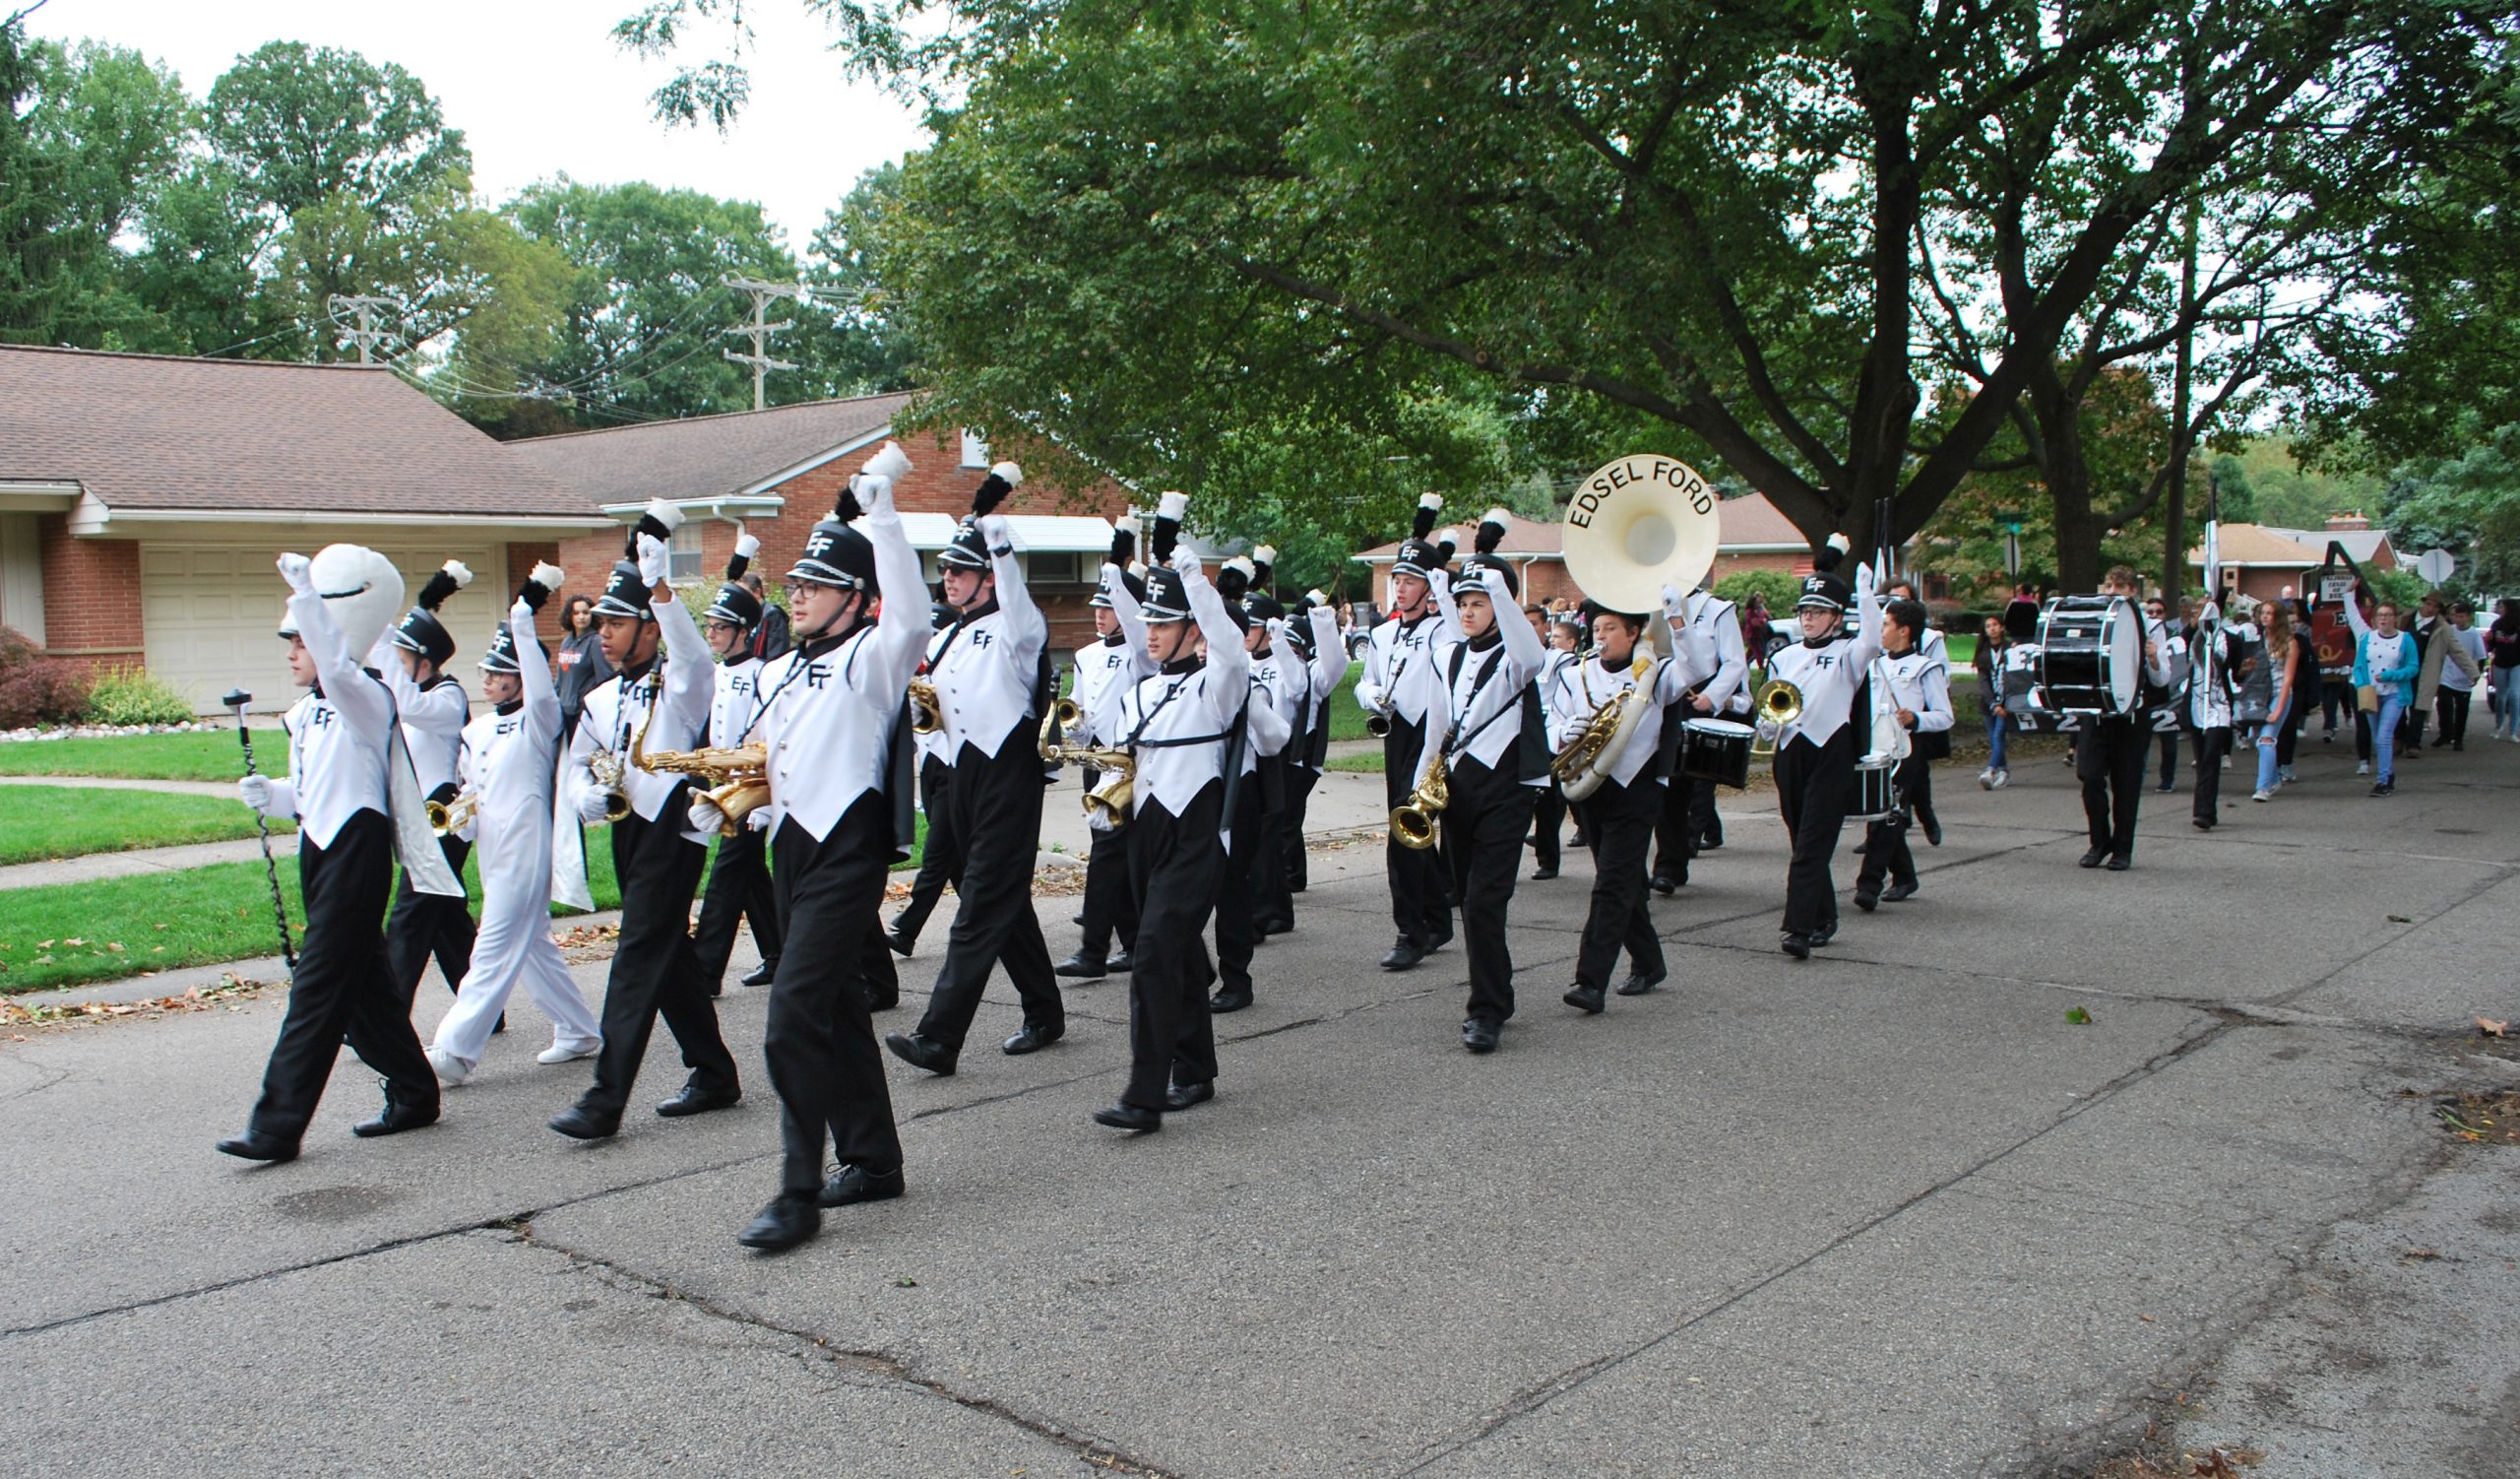 Edsel Ford High School's marching band performs in the neighborhood during the 2018 Homecoming parade.